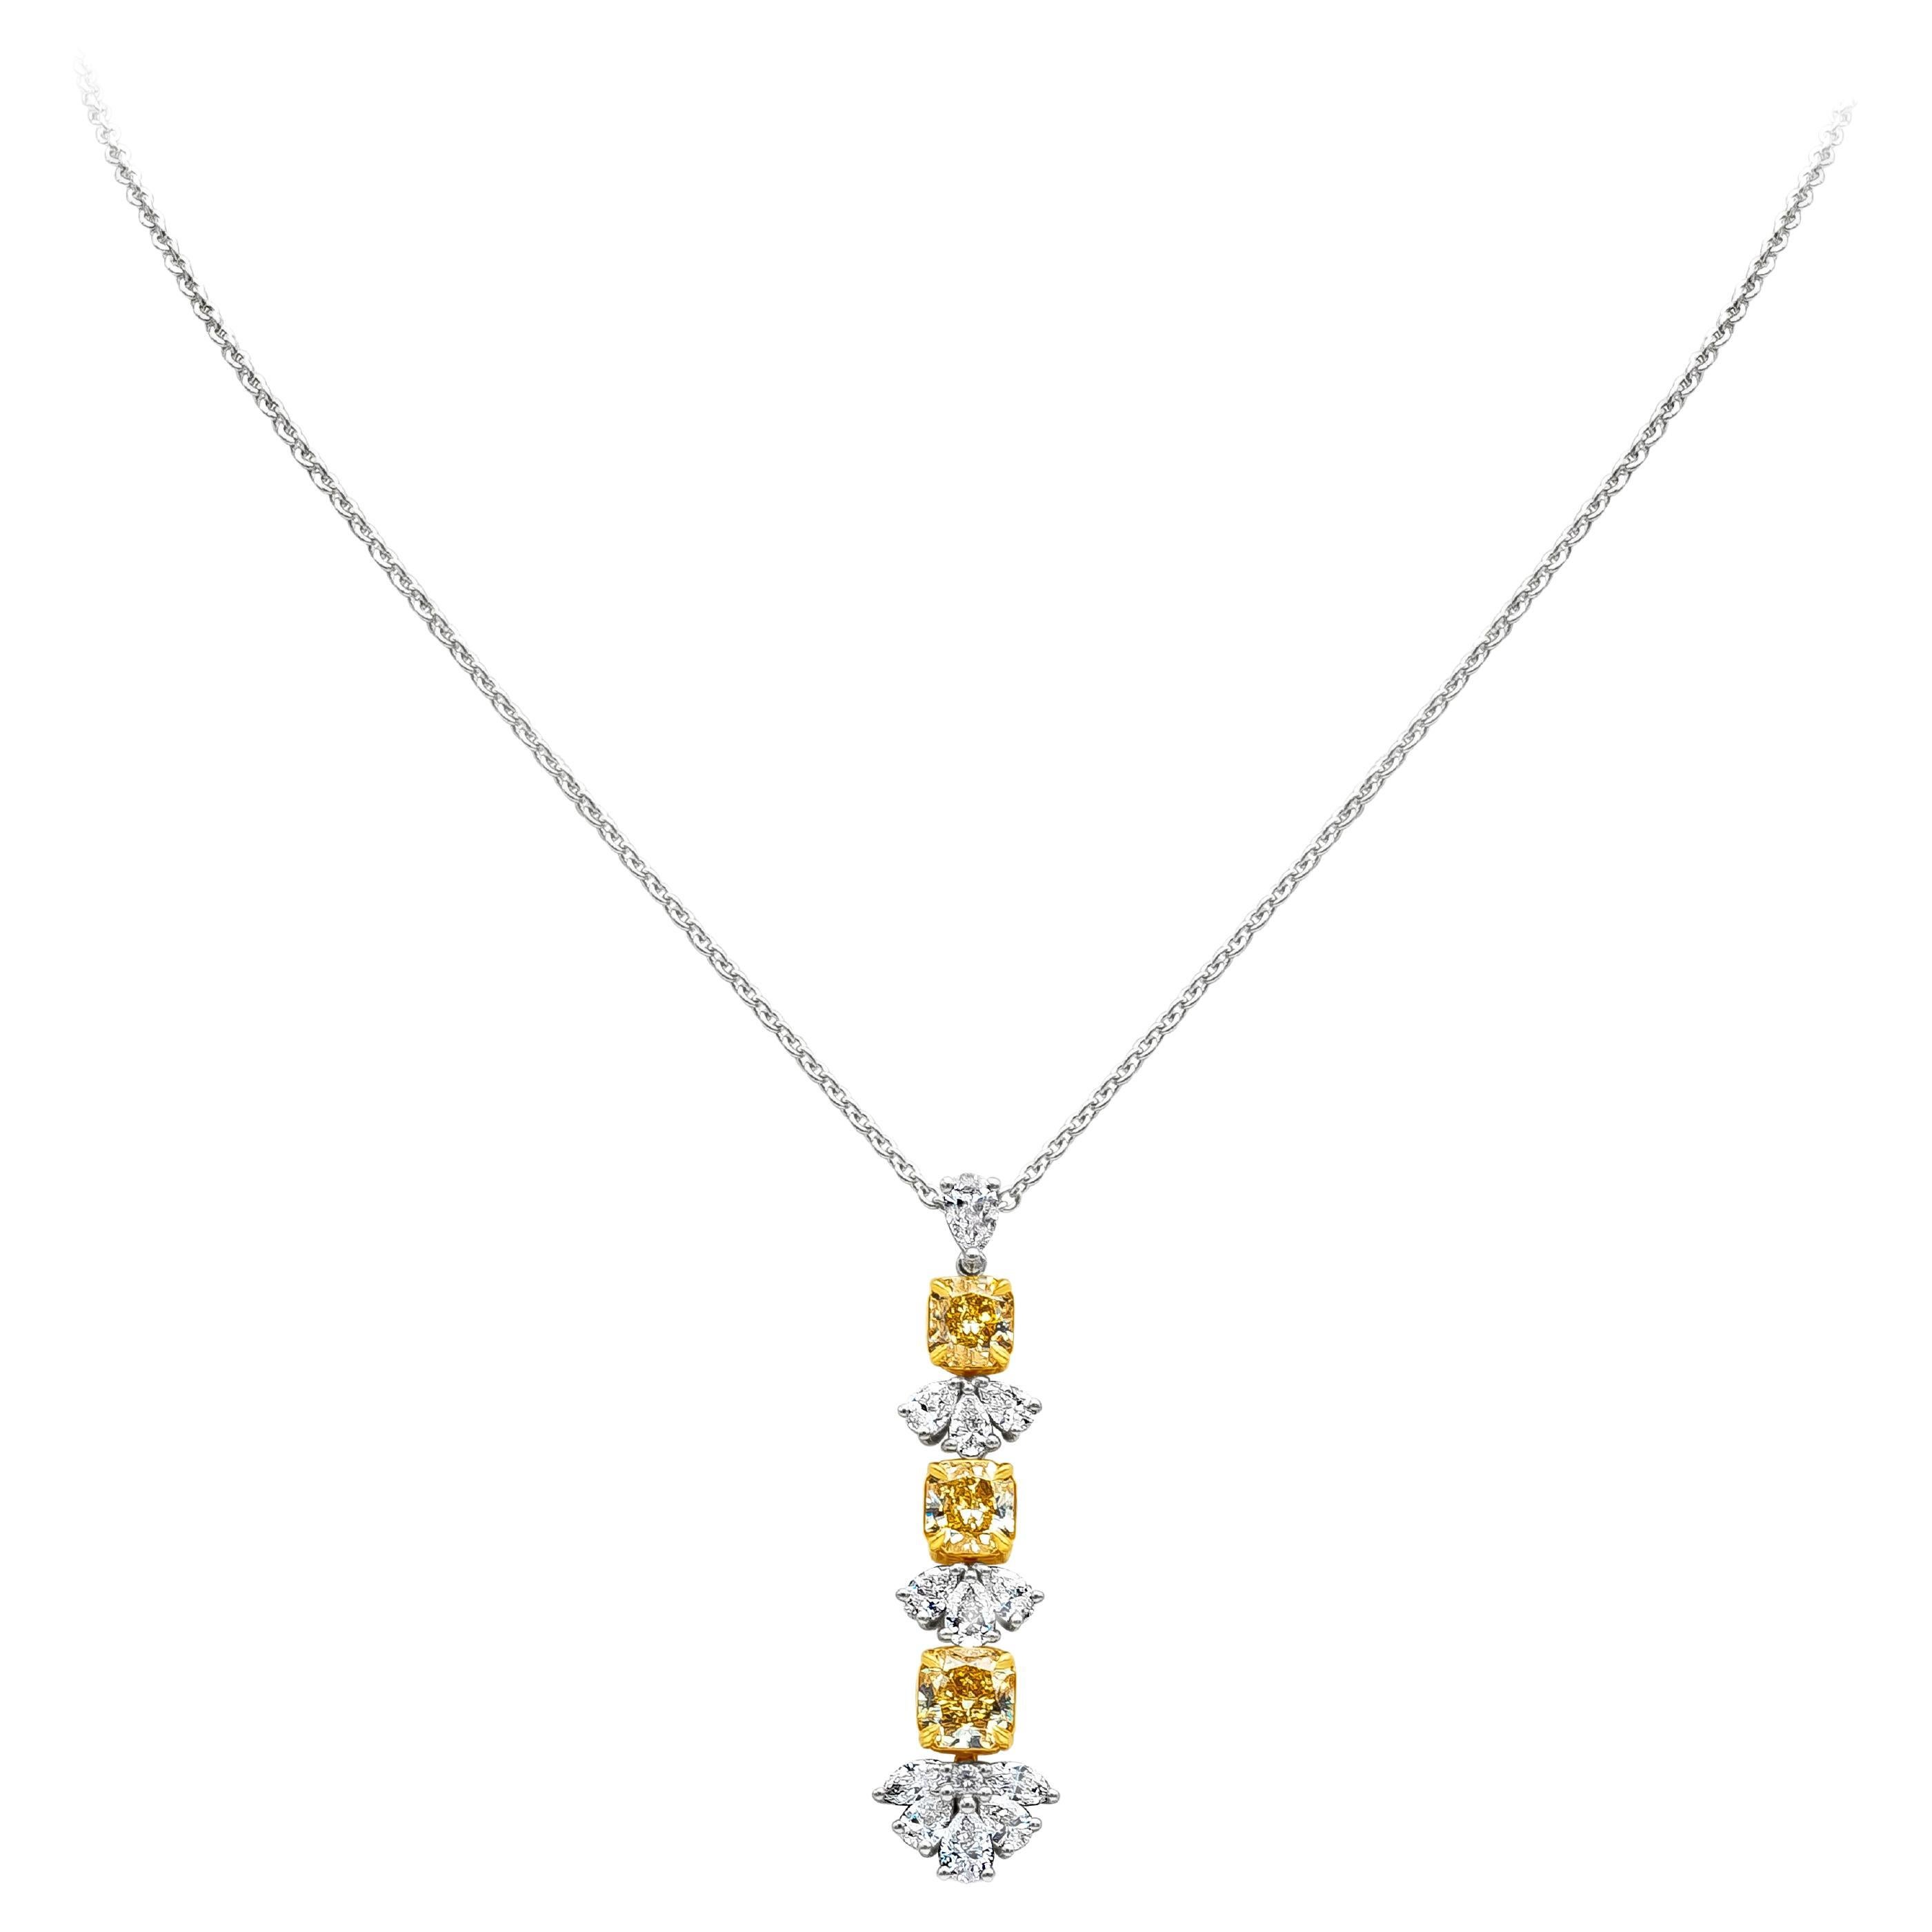 White and Pink Diamond Necklace and Pendant - Moussaieff